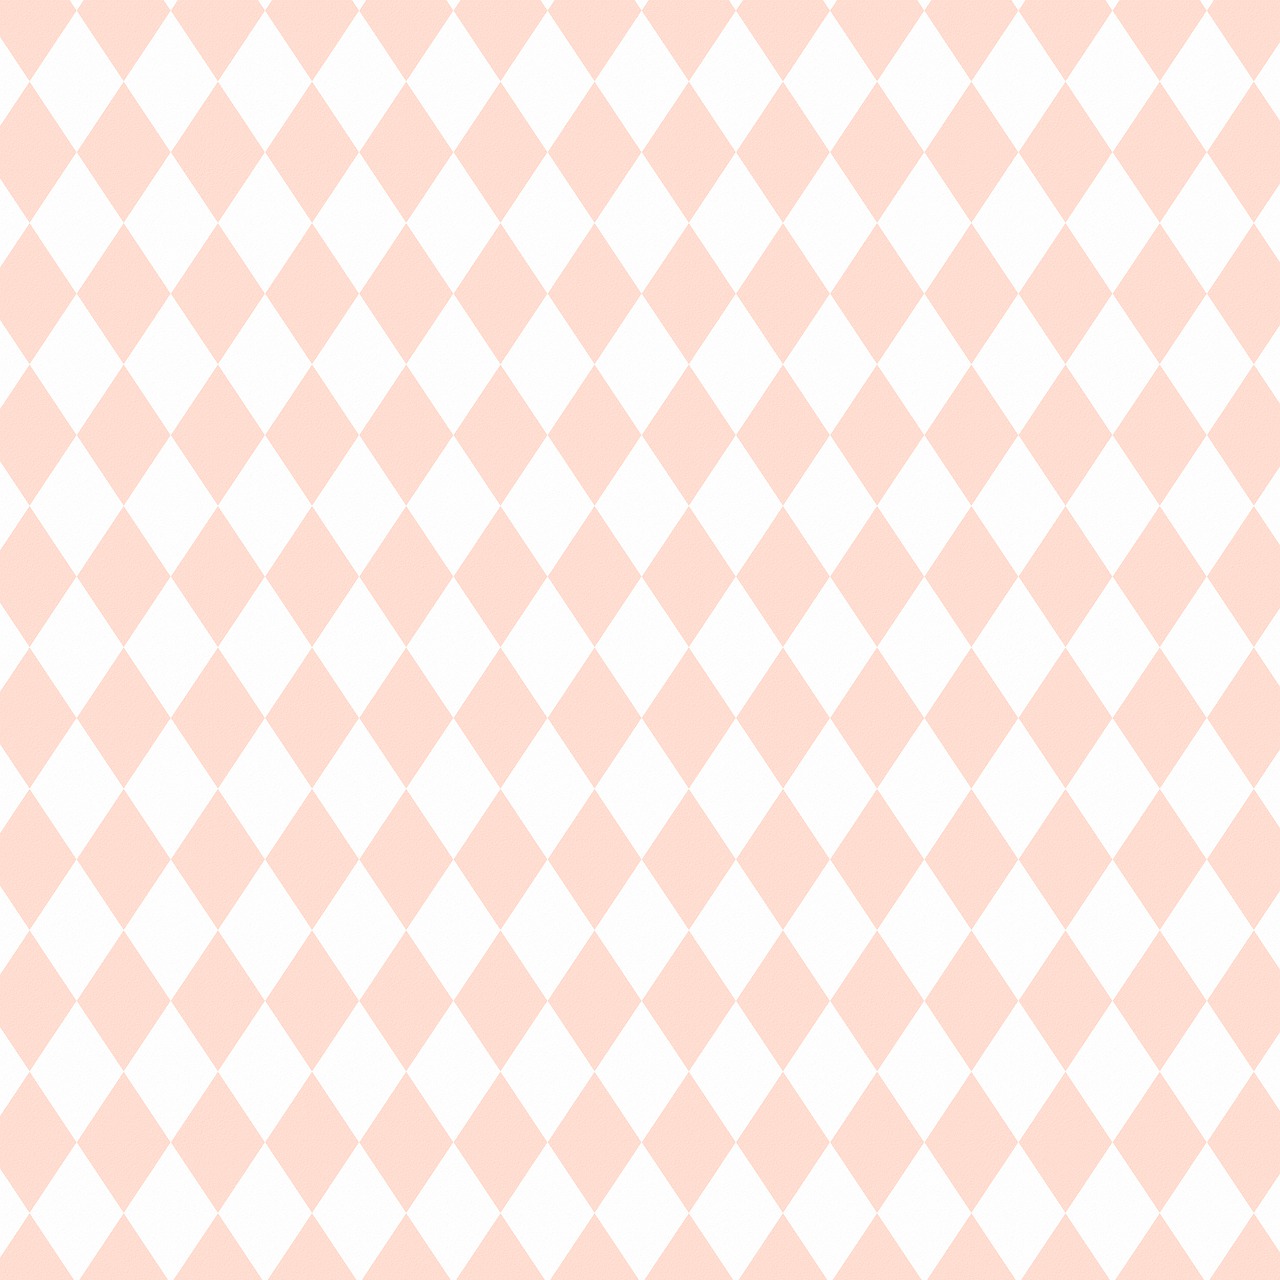 a pink and white checkered pattern is shown, inspired by Kōno Bairei, tumblr, romanticism, diamond and rose quartz, circus background, light brown background, bright uniform background